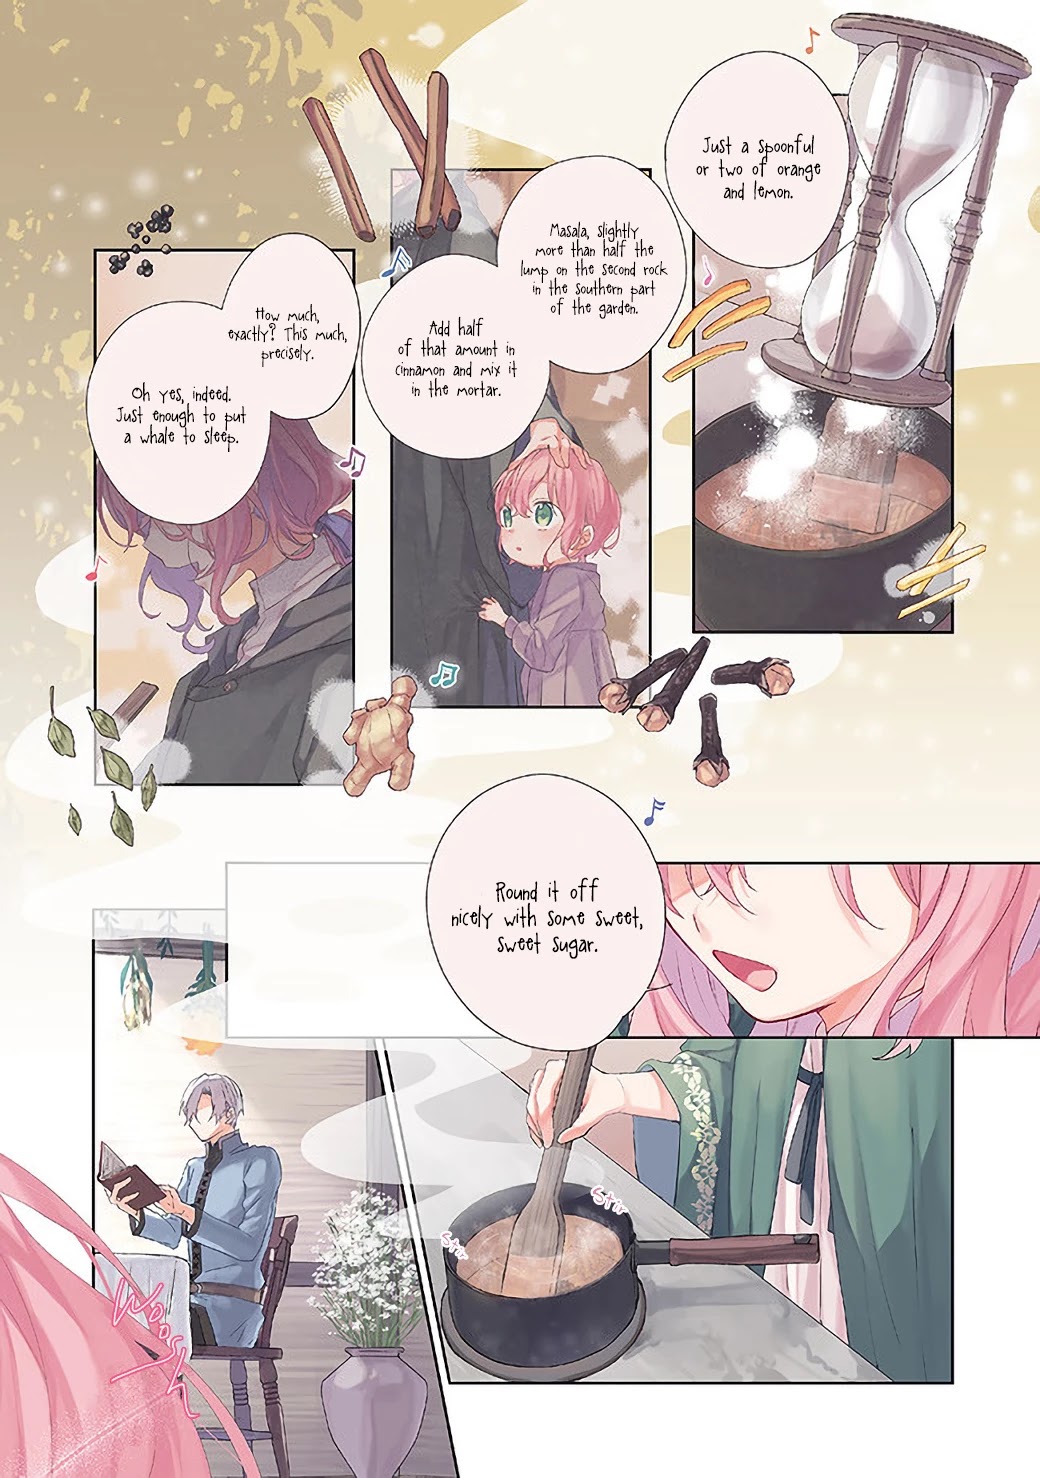 Hello, I Am A Witch, And My Crush Wants Me To Make A Love Potion! - Page 2